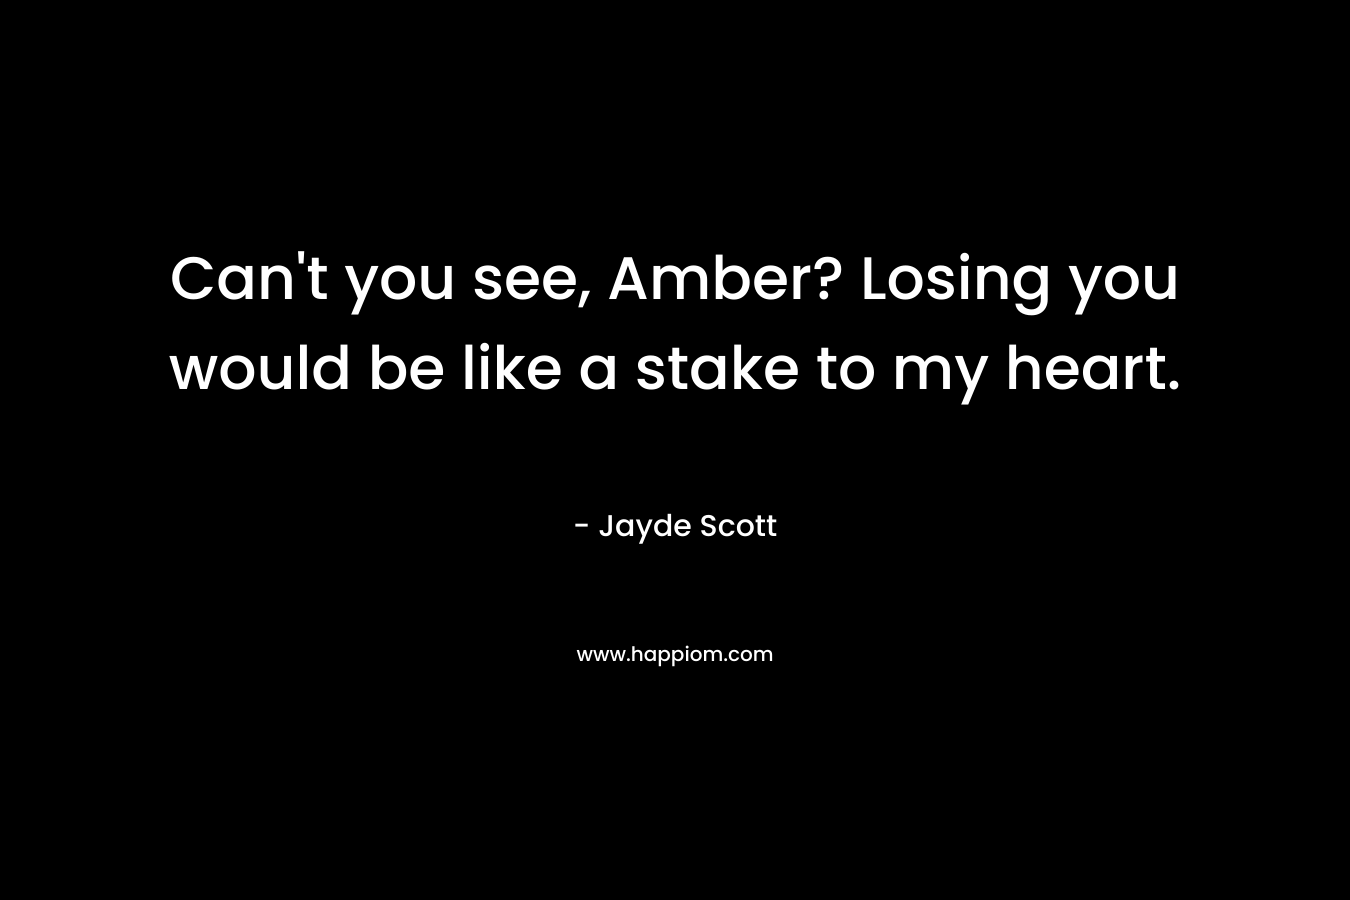 Can’t you see, Amber? Losing you would be like a stake to my heart. – Jayde Scott